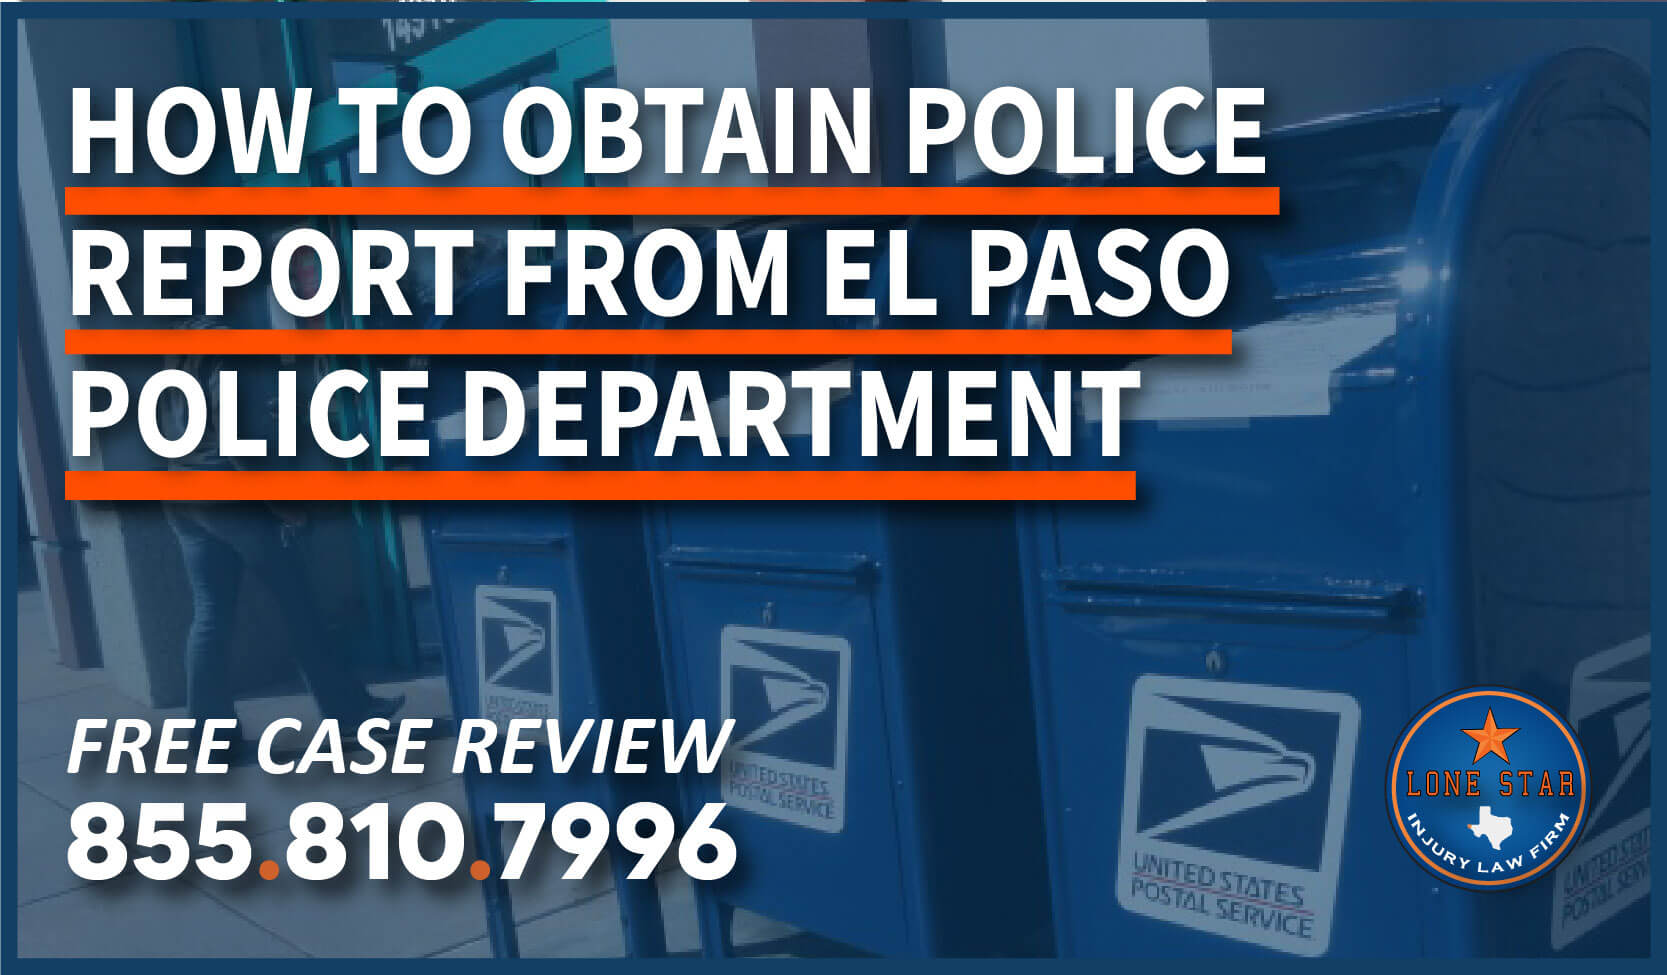 How to Obtain Police Reports from the El Paso Police Department lone start injury law firm